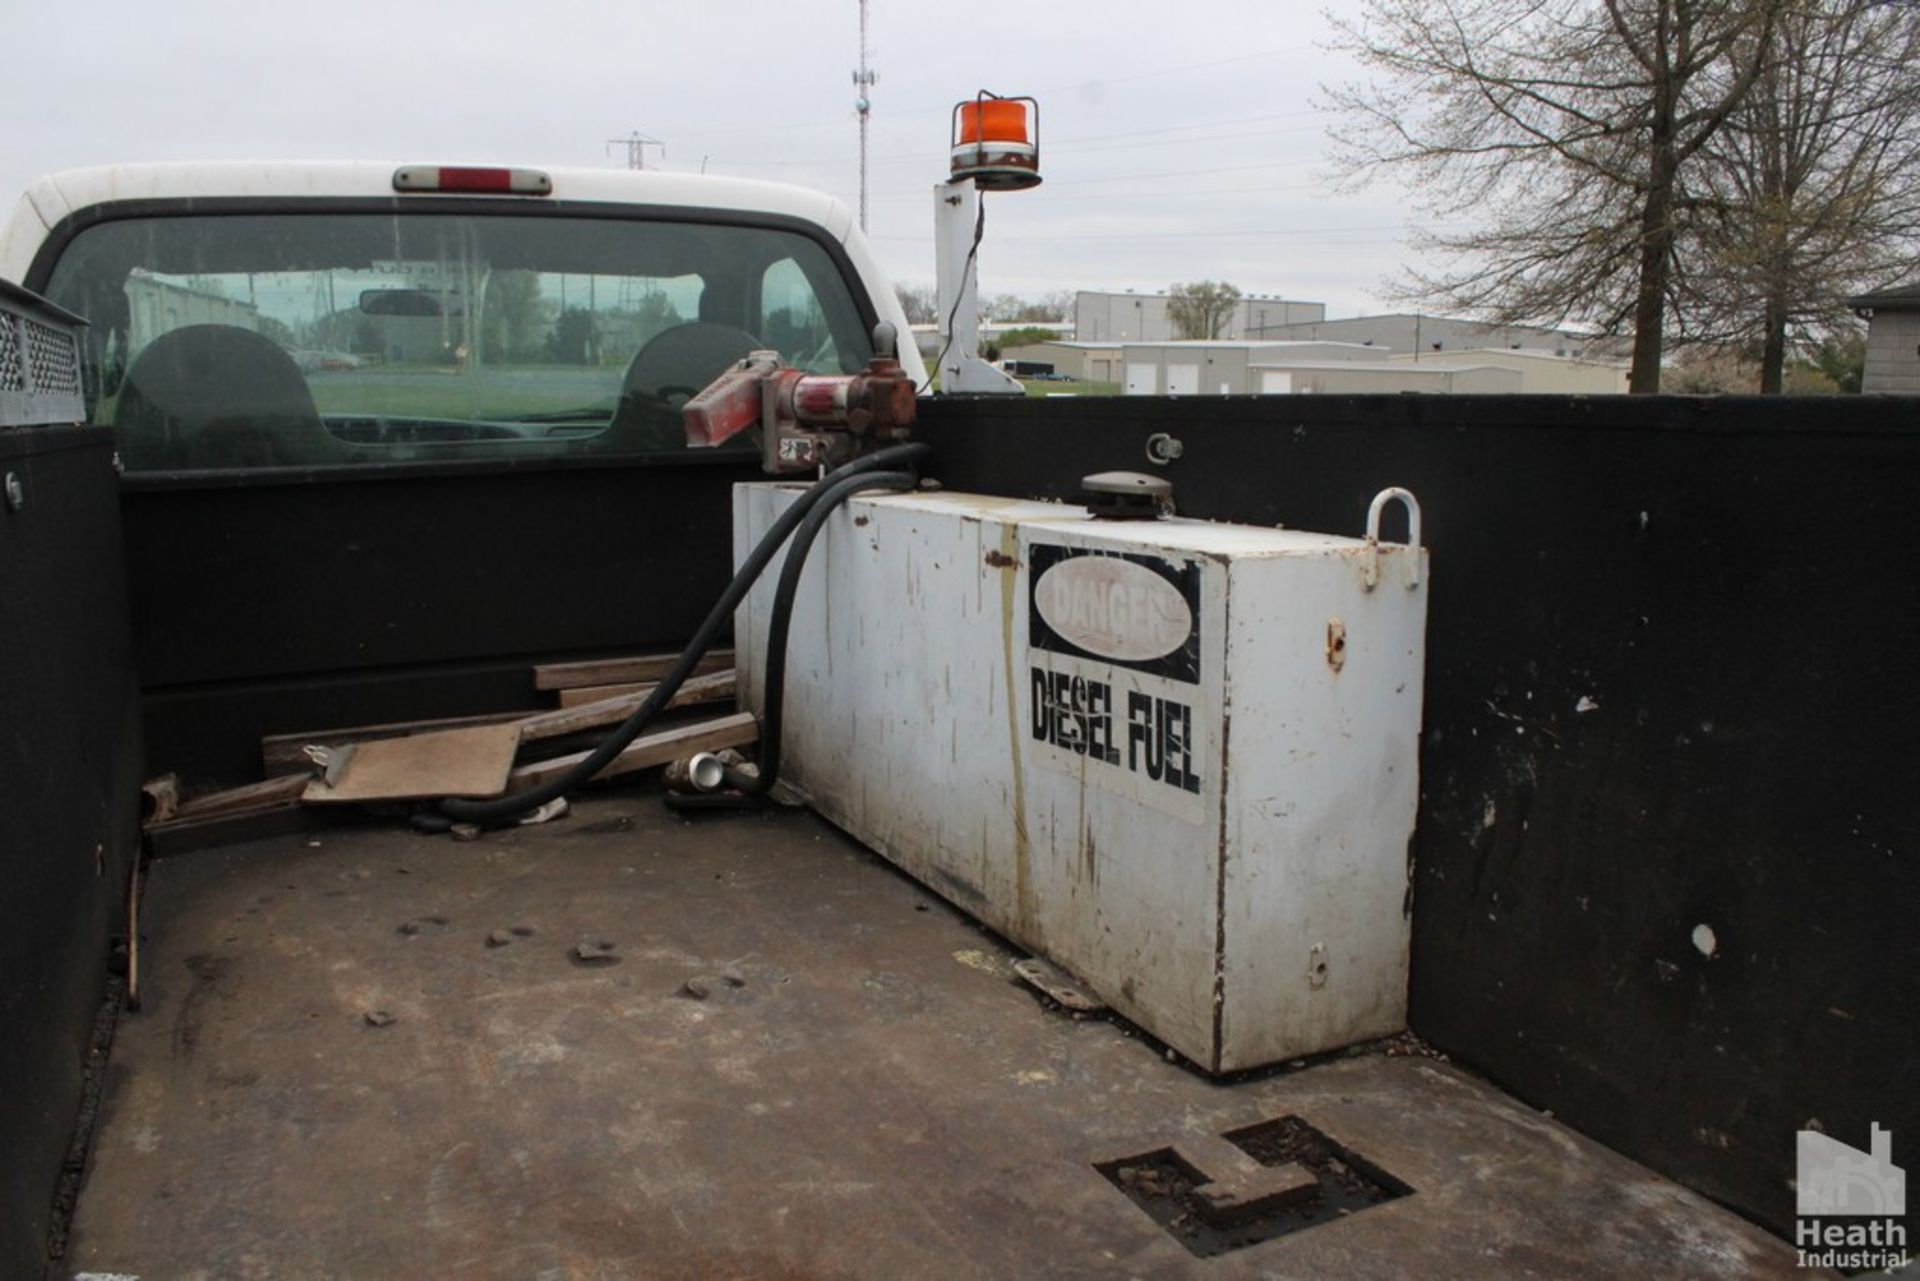 FORD F250 XL SUPER DUTY PICK UP TRUCK | CONTRACTOR STYLE BODY | DIESEL FUEL TANK WITH PUMP | - Image 5 of 9